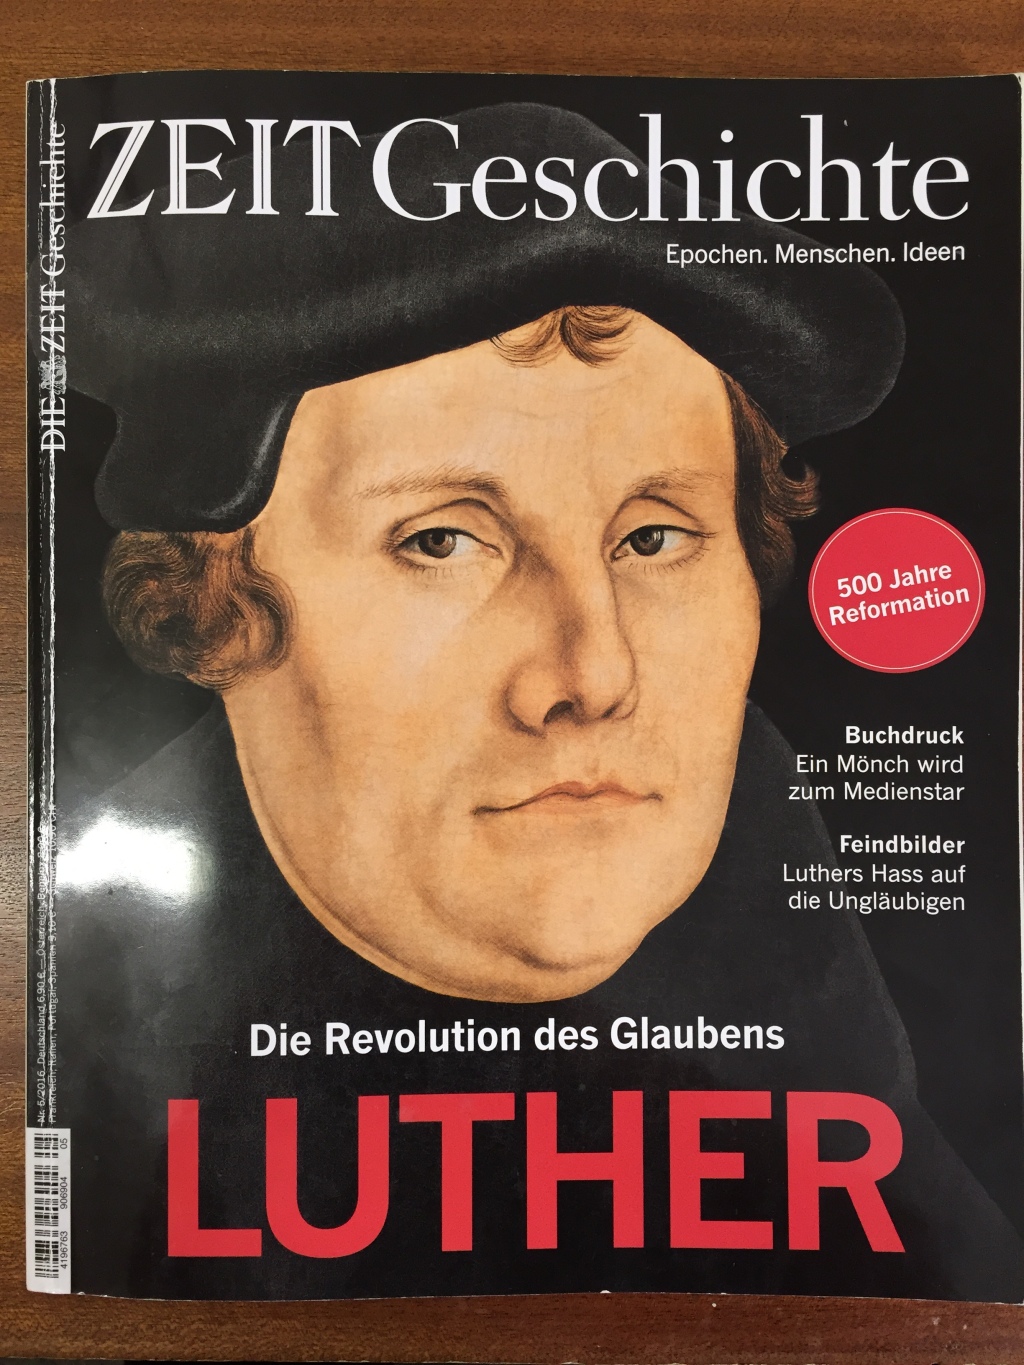 Germany: How Much “Progress” We Have Made after 500 Years of Reformation!